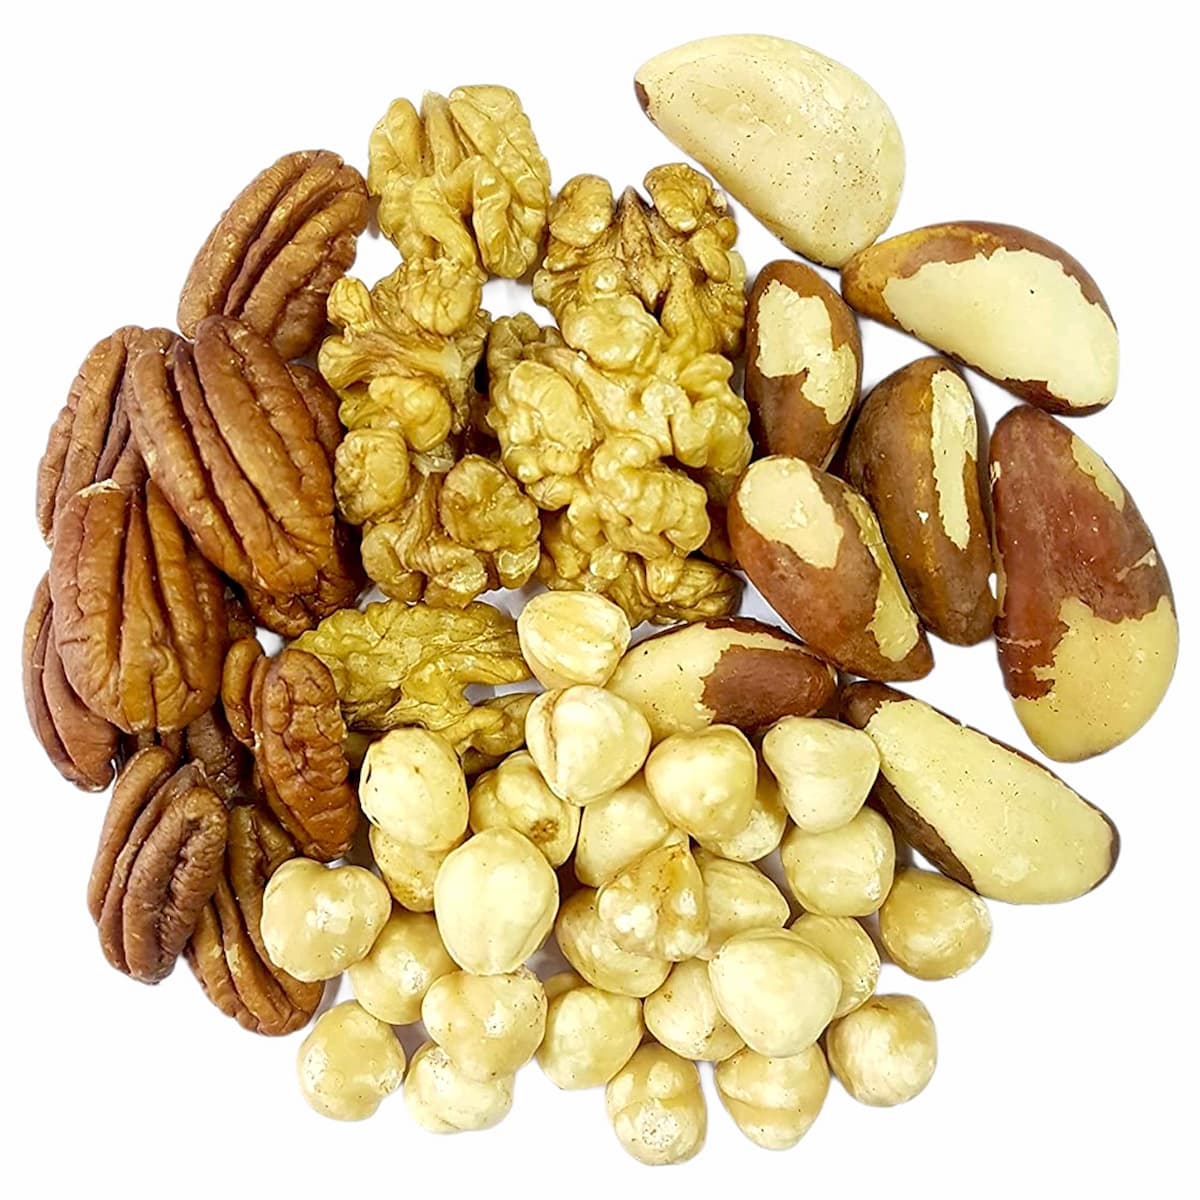 dry nuts online shopping india